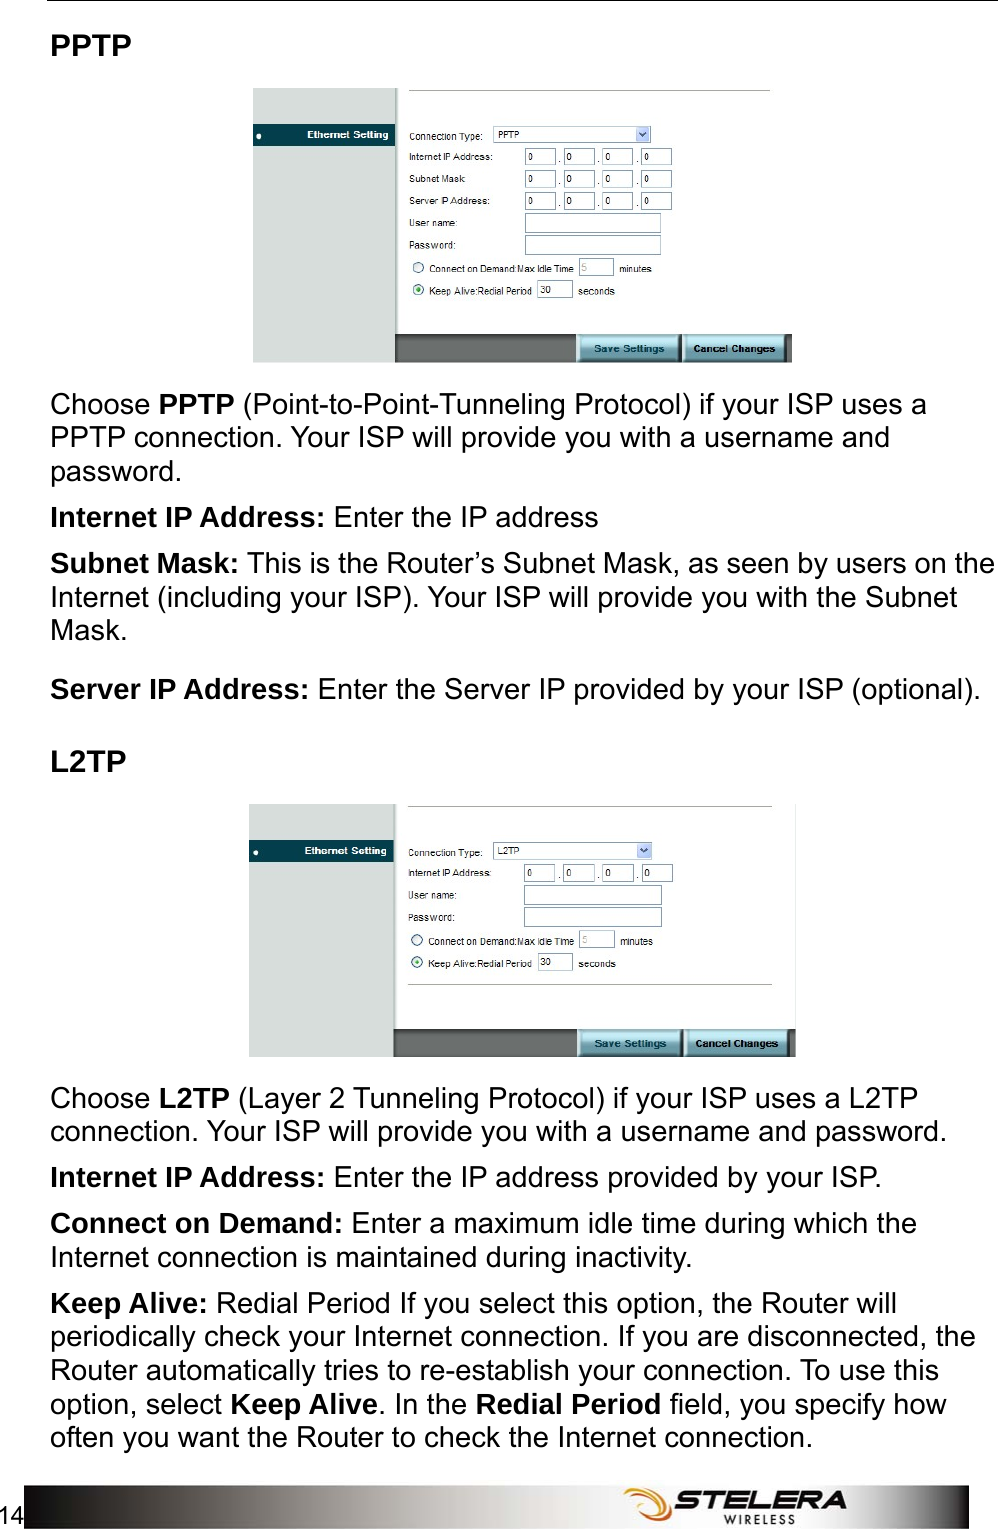 Internet Setup 14   PPTP  Choose PPTP (Point-to-Point-Tunneling Protocol) if your ISP uses a PPTP connection. Your ISP will provide you with a username and password. Internet IP Address: Enter the IP address   Subnet Mask: This is the Router’s Subnet Mask, as seen by users on the Internet (including your ISP). Your ISP will provide you with the Subnet Mask. Server IP Address: Enter the Server IP provided by your ISP (optional). L2TP  Choose L2TP (Layer 2 Tunneling Protocol) if your ISP uses a L2TP connection. Your ISP will provide you with a username and password.   Internet IP Address: Enter the IP address provided by your ISP. Connect on Demand: Enter a maximum idle time during which the Internet connection is maintained during inactivity. Keep Alive: Redial Period If you select this option, the Router will periodically check your Internet connection. If you are disconnected, the Router automatically tries to re-establish your connection. To use this option, select Keep Alive. In the Redial Period field, you specify how often you want the Router to check the Internet connection.   